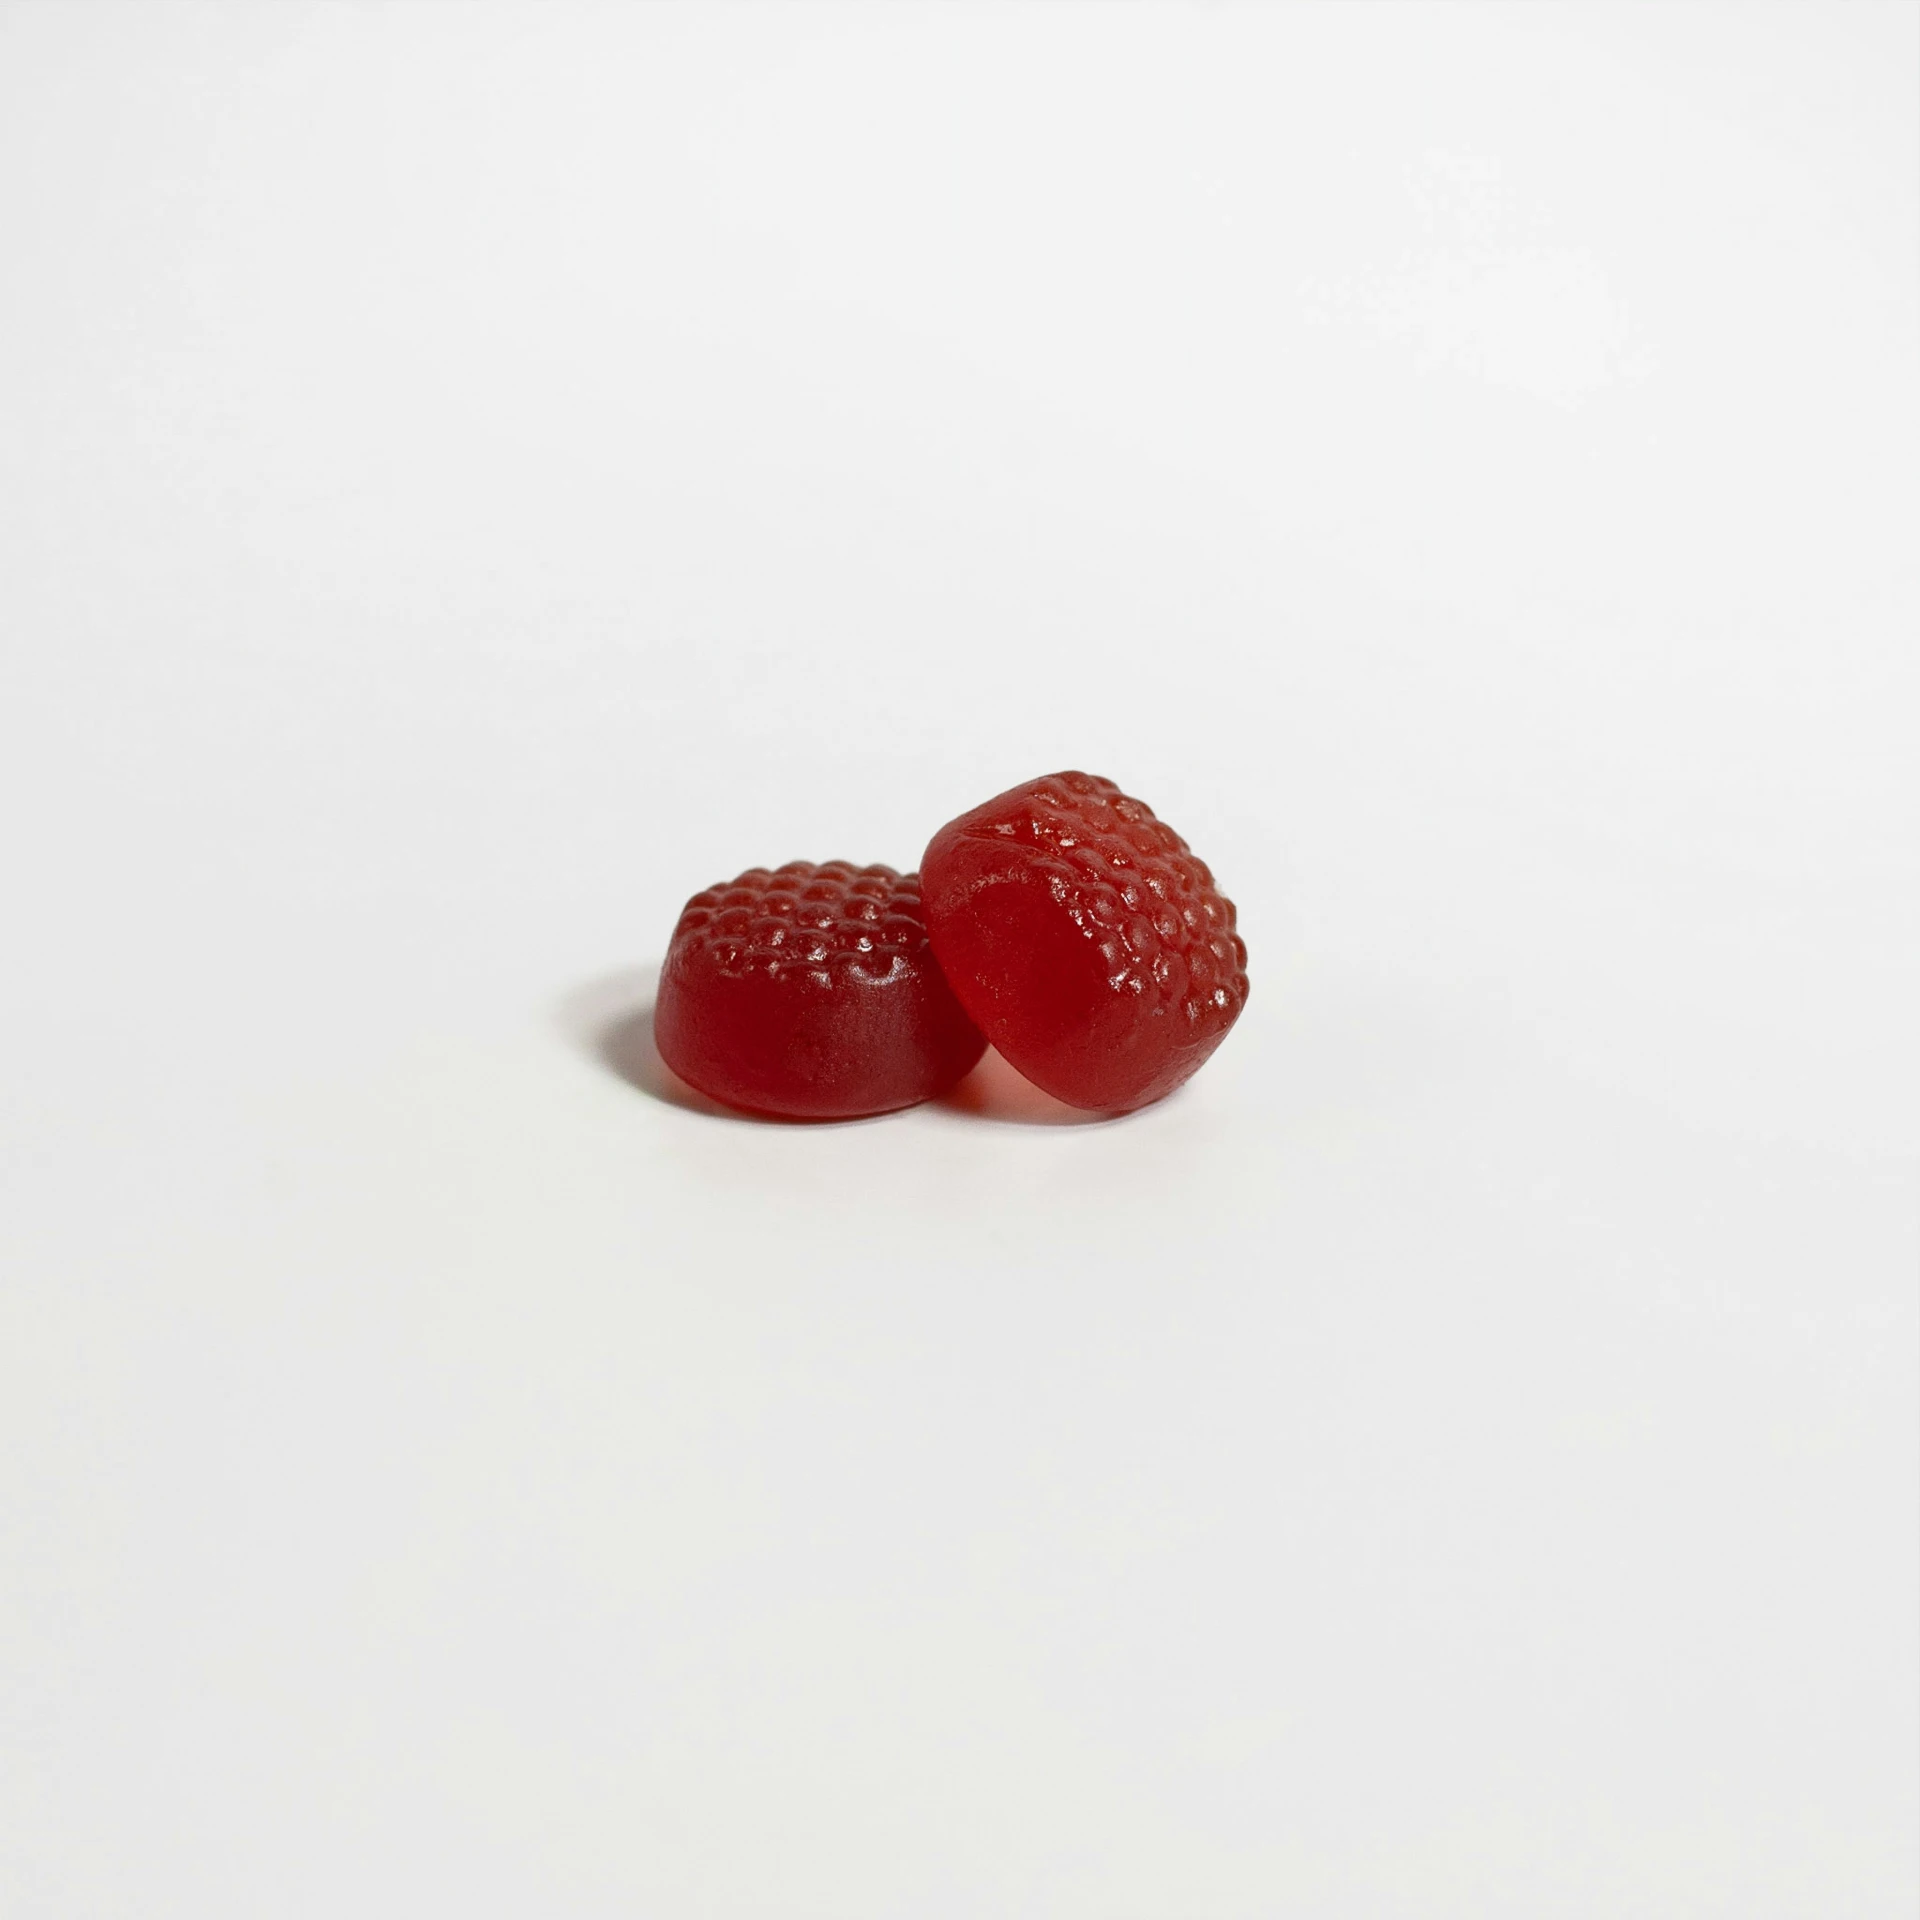 two pieces of red strawberries sit on a white surface